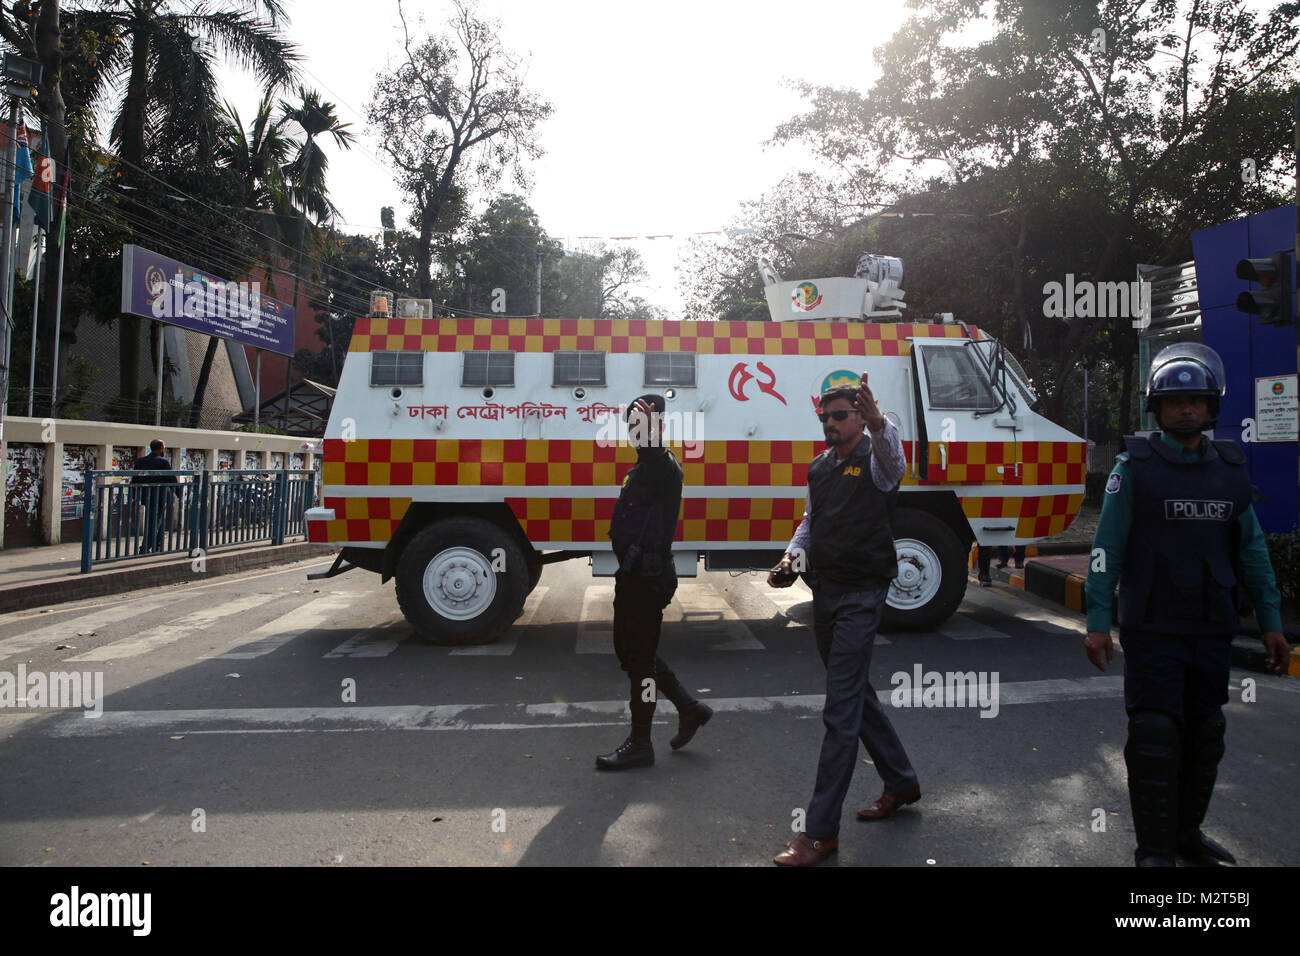 Dhaka, Bangladesh. 8th Feb, 2018. February 08, 2018 Dhaka, Bangladesh - Bangladesh special force member stand guard with their vehicles in the capital Dhaka after the former prime minister and BNP chairperson Khaleda Zia sentenced to five years in prison, in Dhaka, Bangladesh 08 February 2018. BNP leader Khaleda Zia sentenced to five years in prison after a court found her guilty in a corruption case. According to complainant, a grant of 1,255,000 US dollars was transferred from the United Saudi Commercial Bank to the Prime Minister's Orphanage Fund. The then premier Khaleda created the f Stock Photo